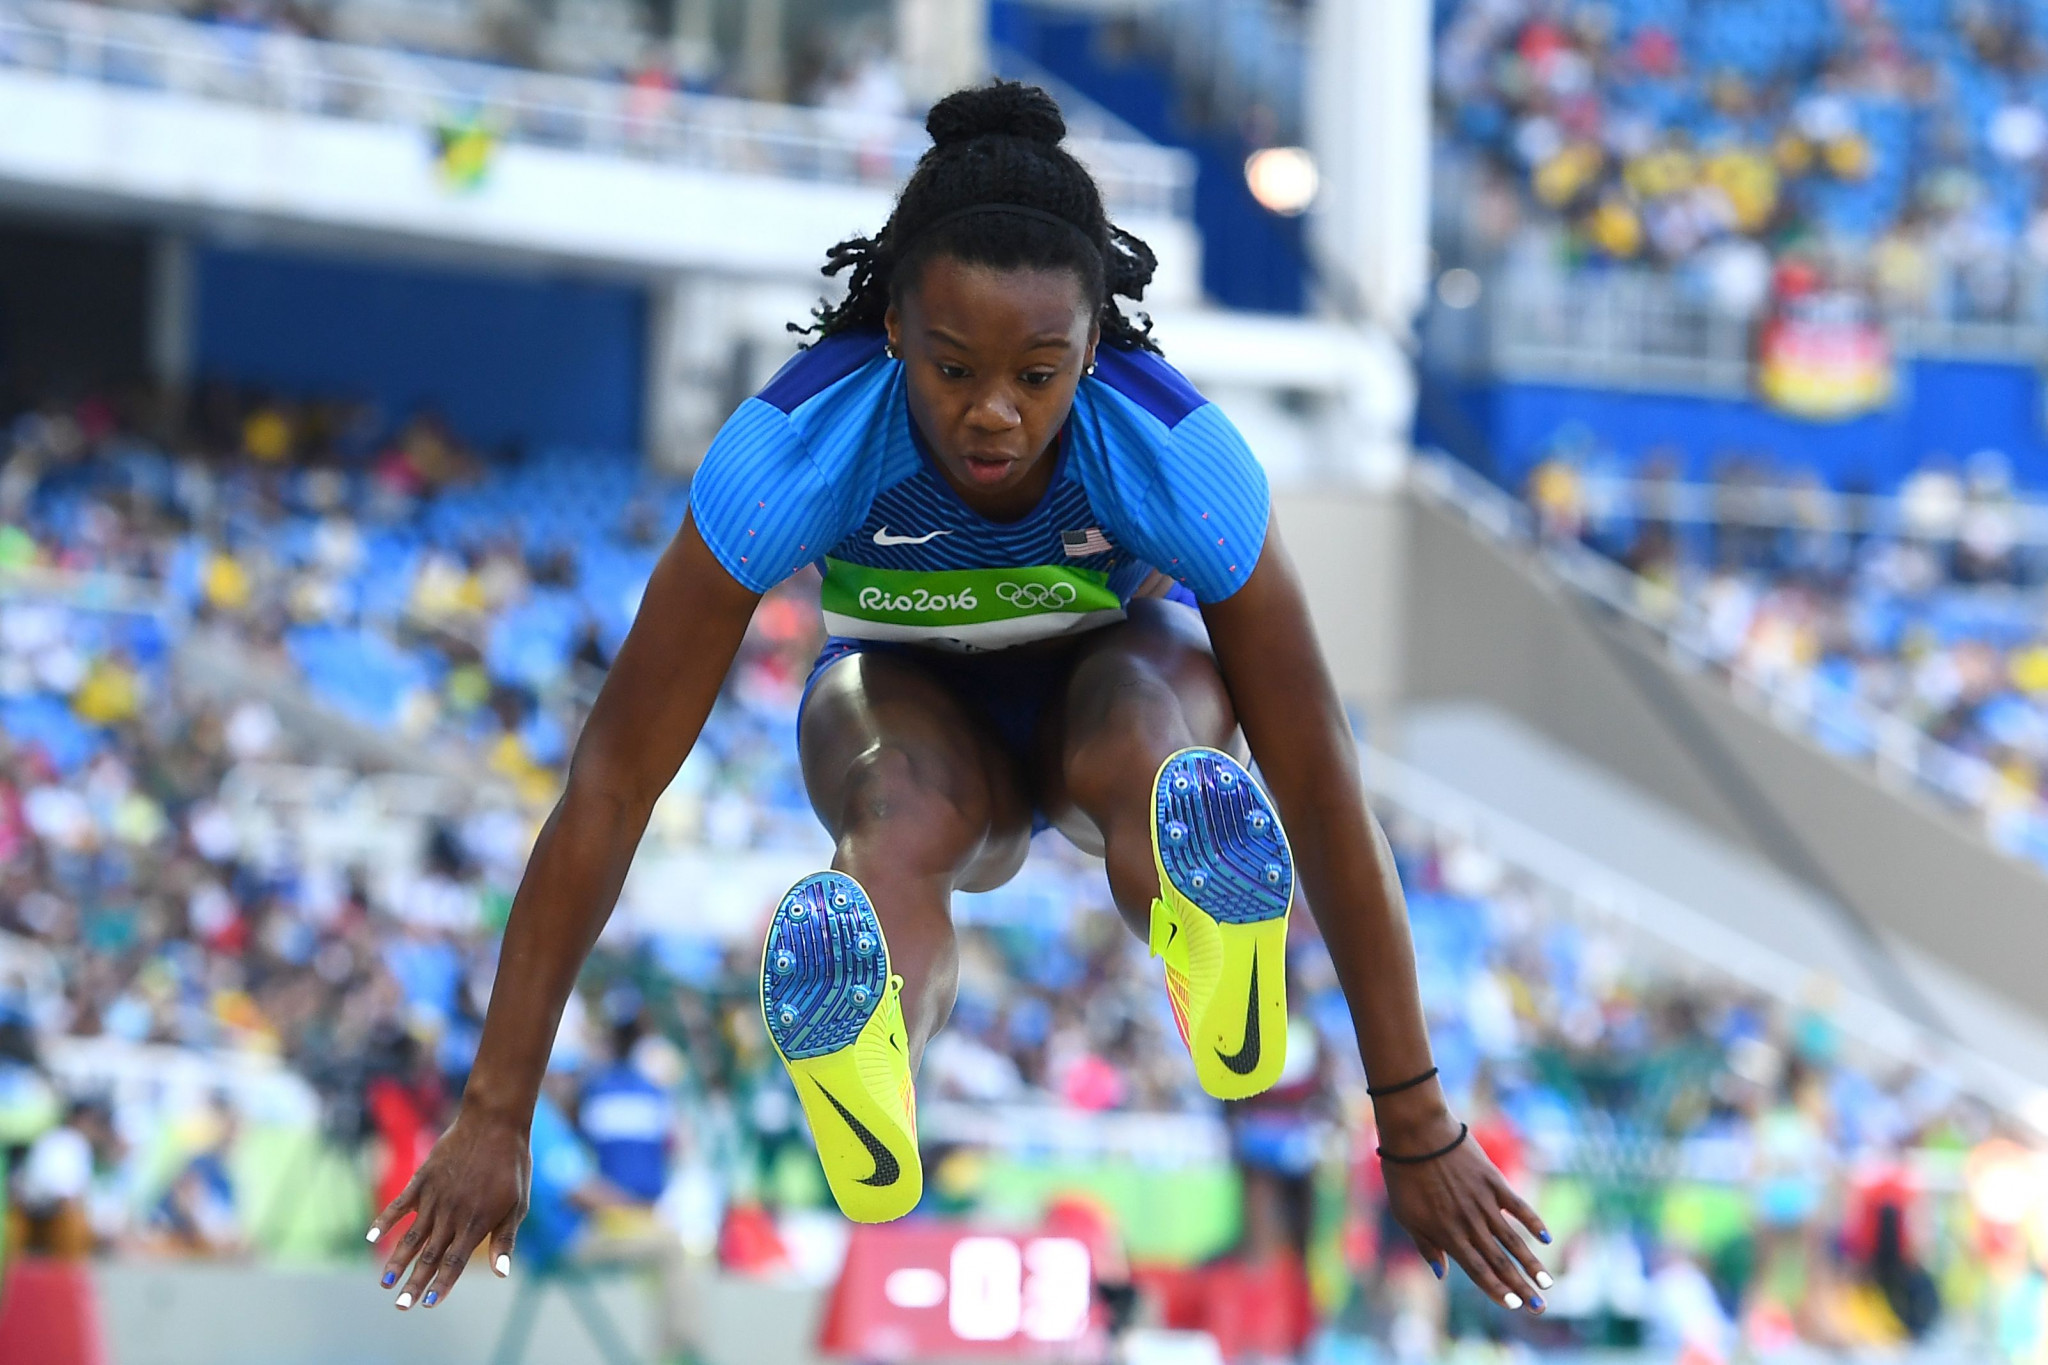 Keturah Orji, who has been nominated for the 2018 National Collegiate Athletic Association Woman of the Year award, competing in the 2016 Rio Olympics ©Getty Images